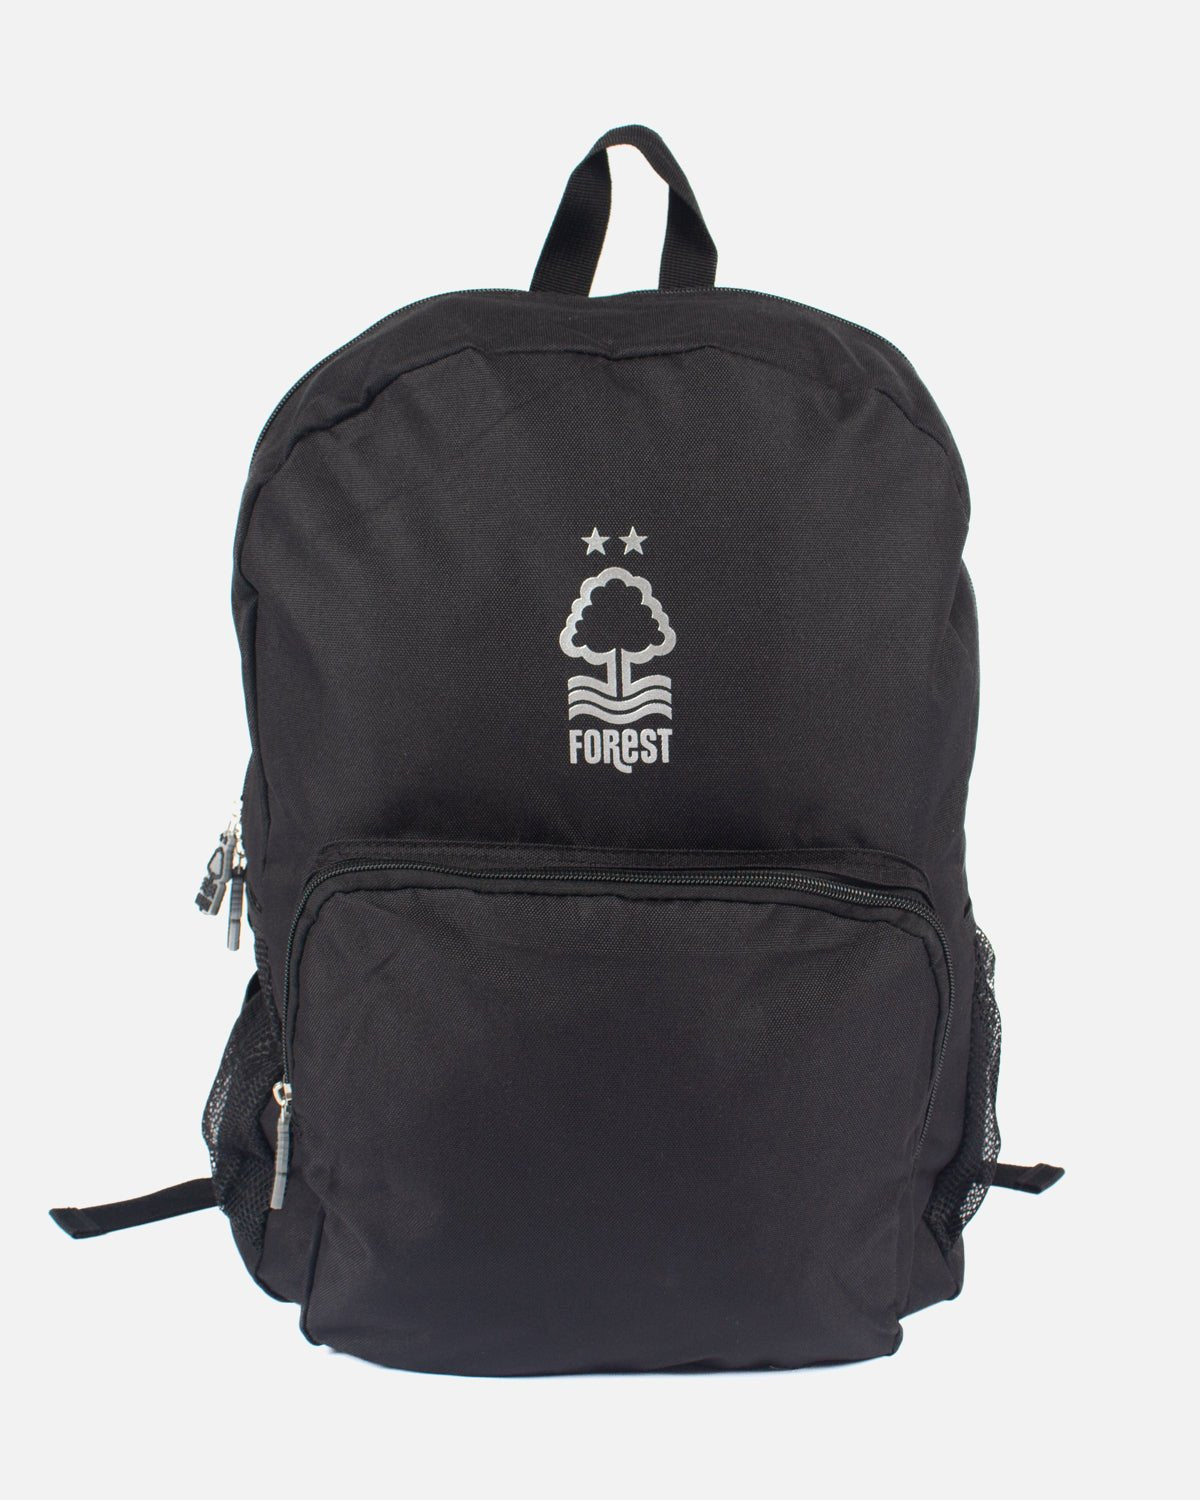 NFFC Recycled Backpack - Nottingham Forest FC